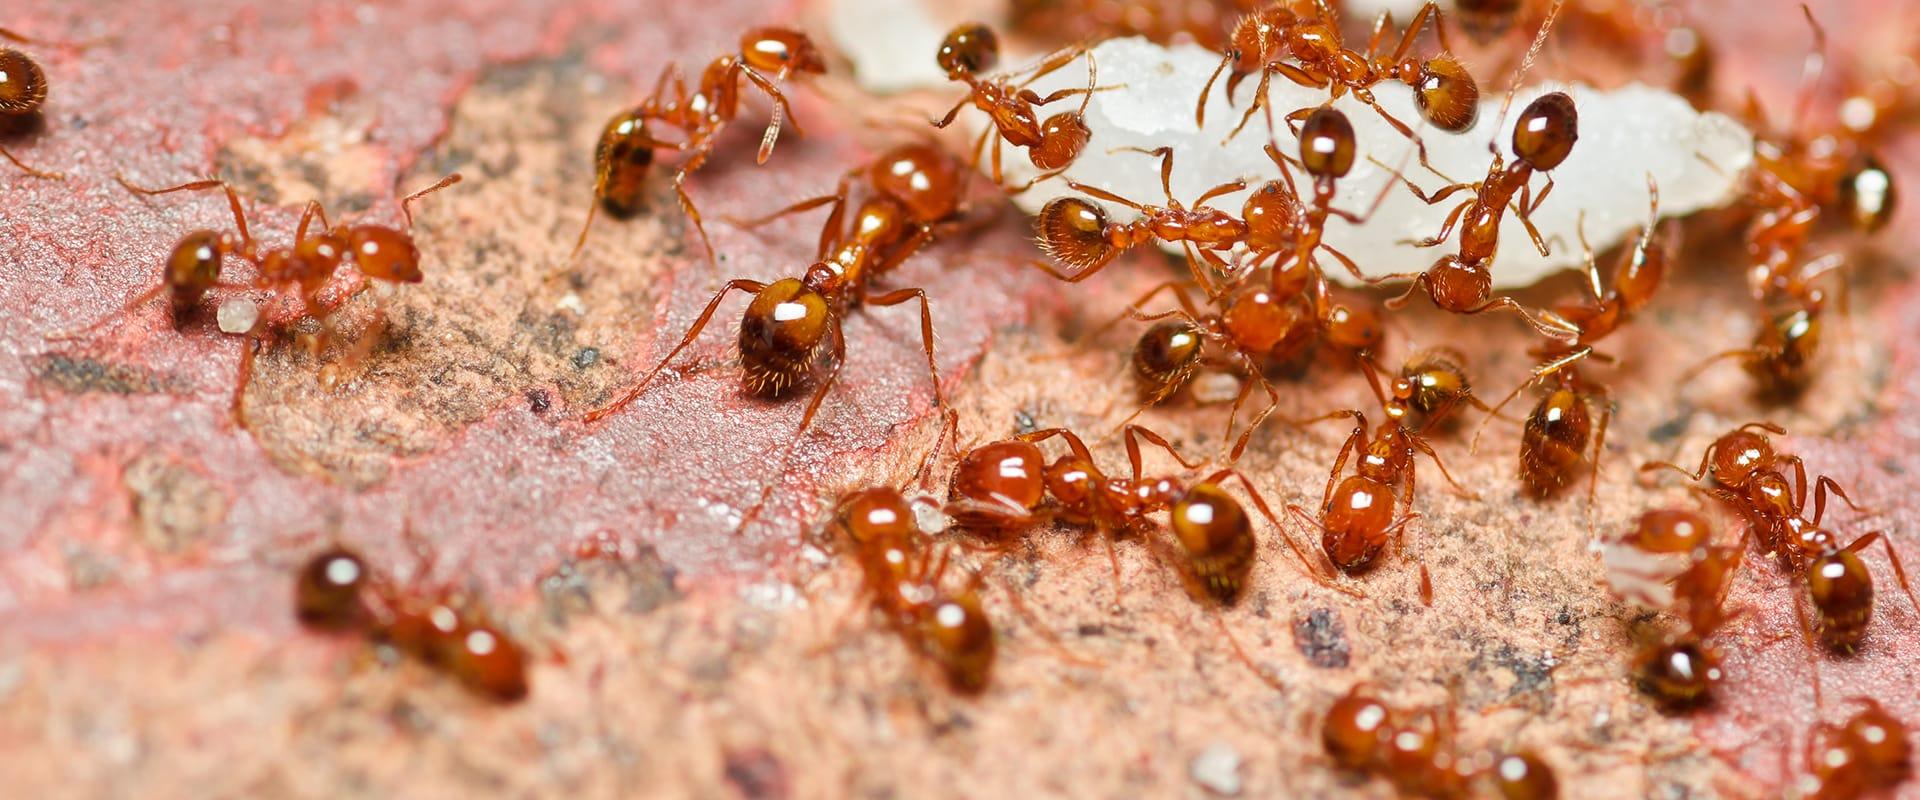 a swarm of fire ants outside of a home in boca raton florida